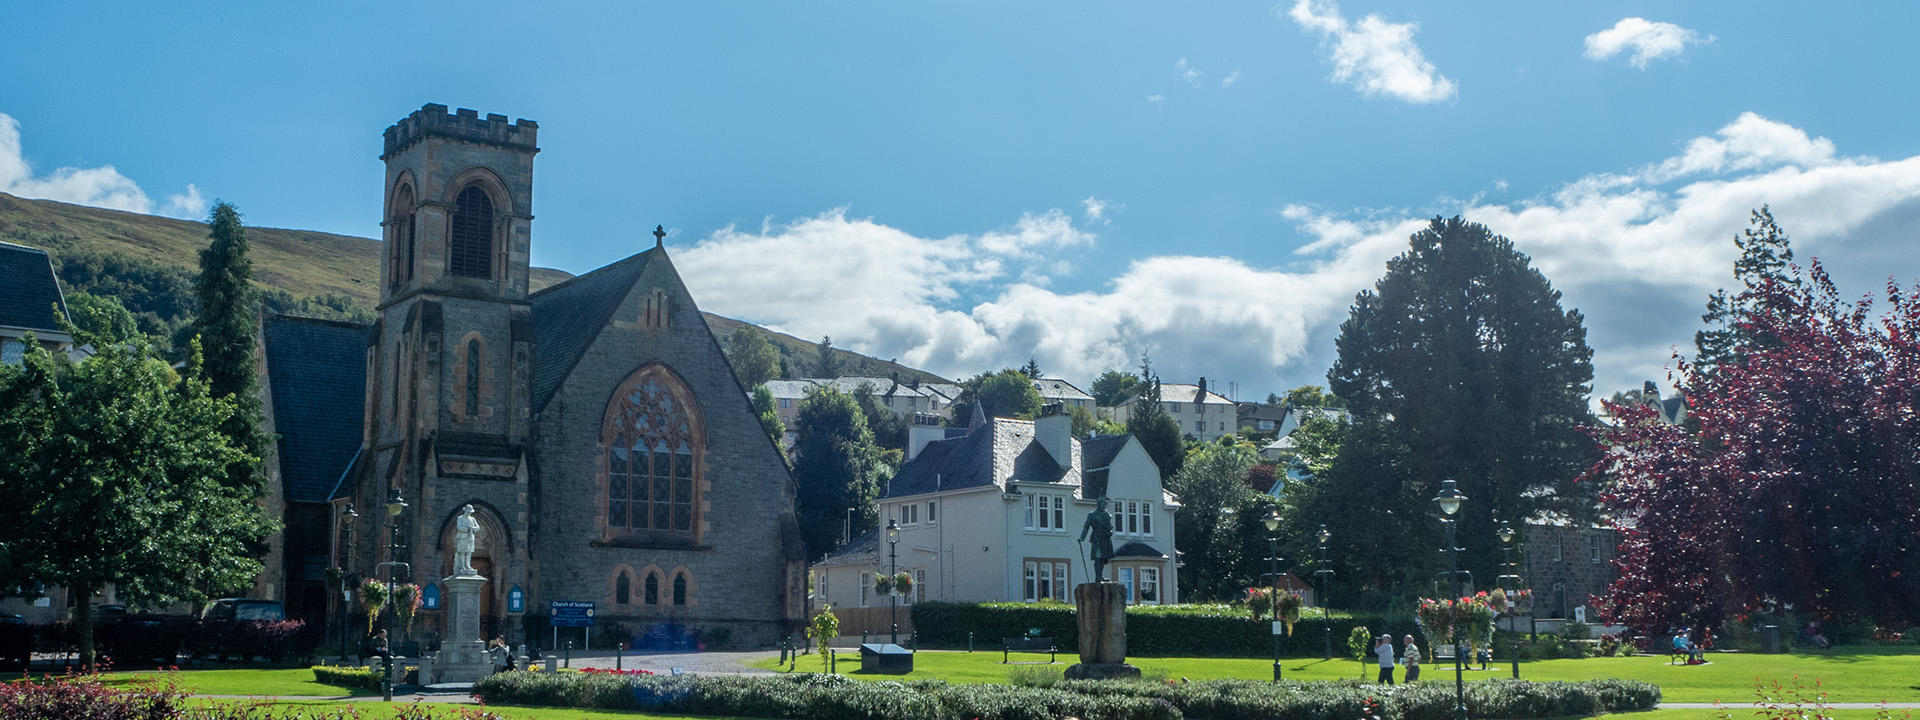 Church in Fort William with park in front.